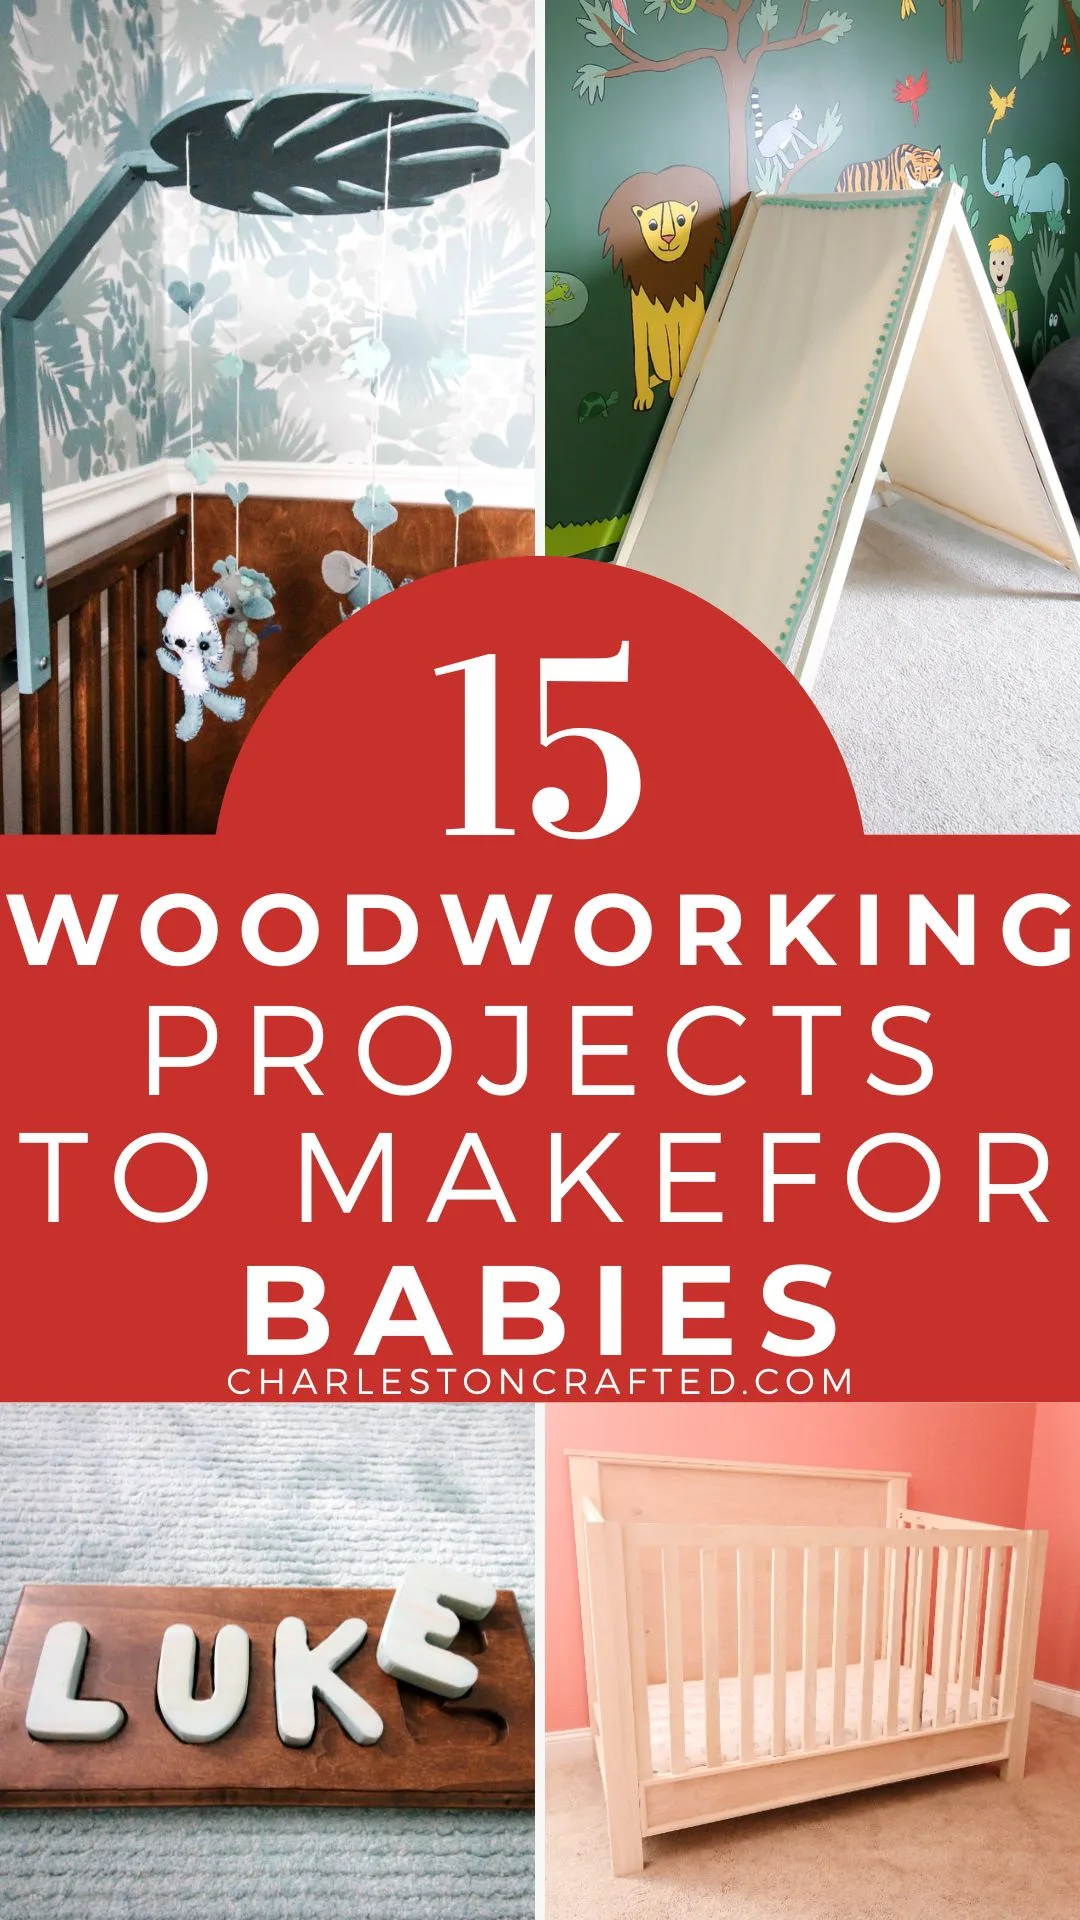 woodworking projects to make for babies